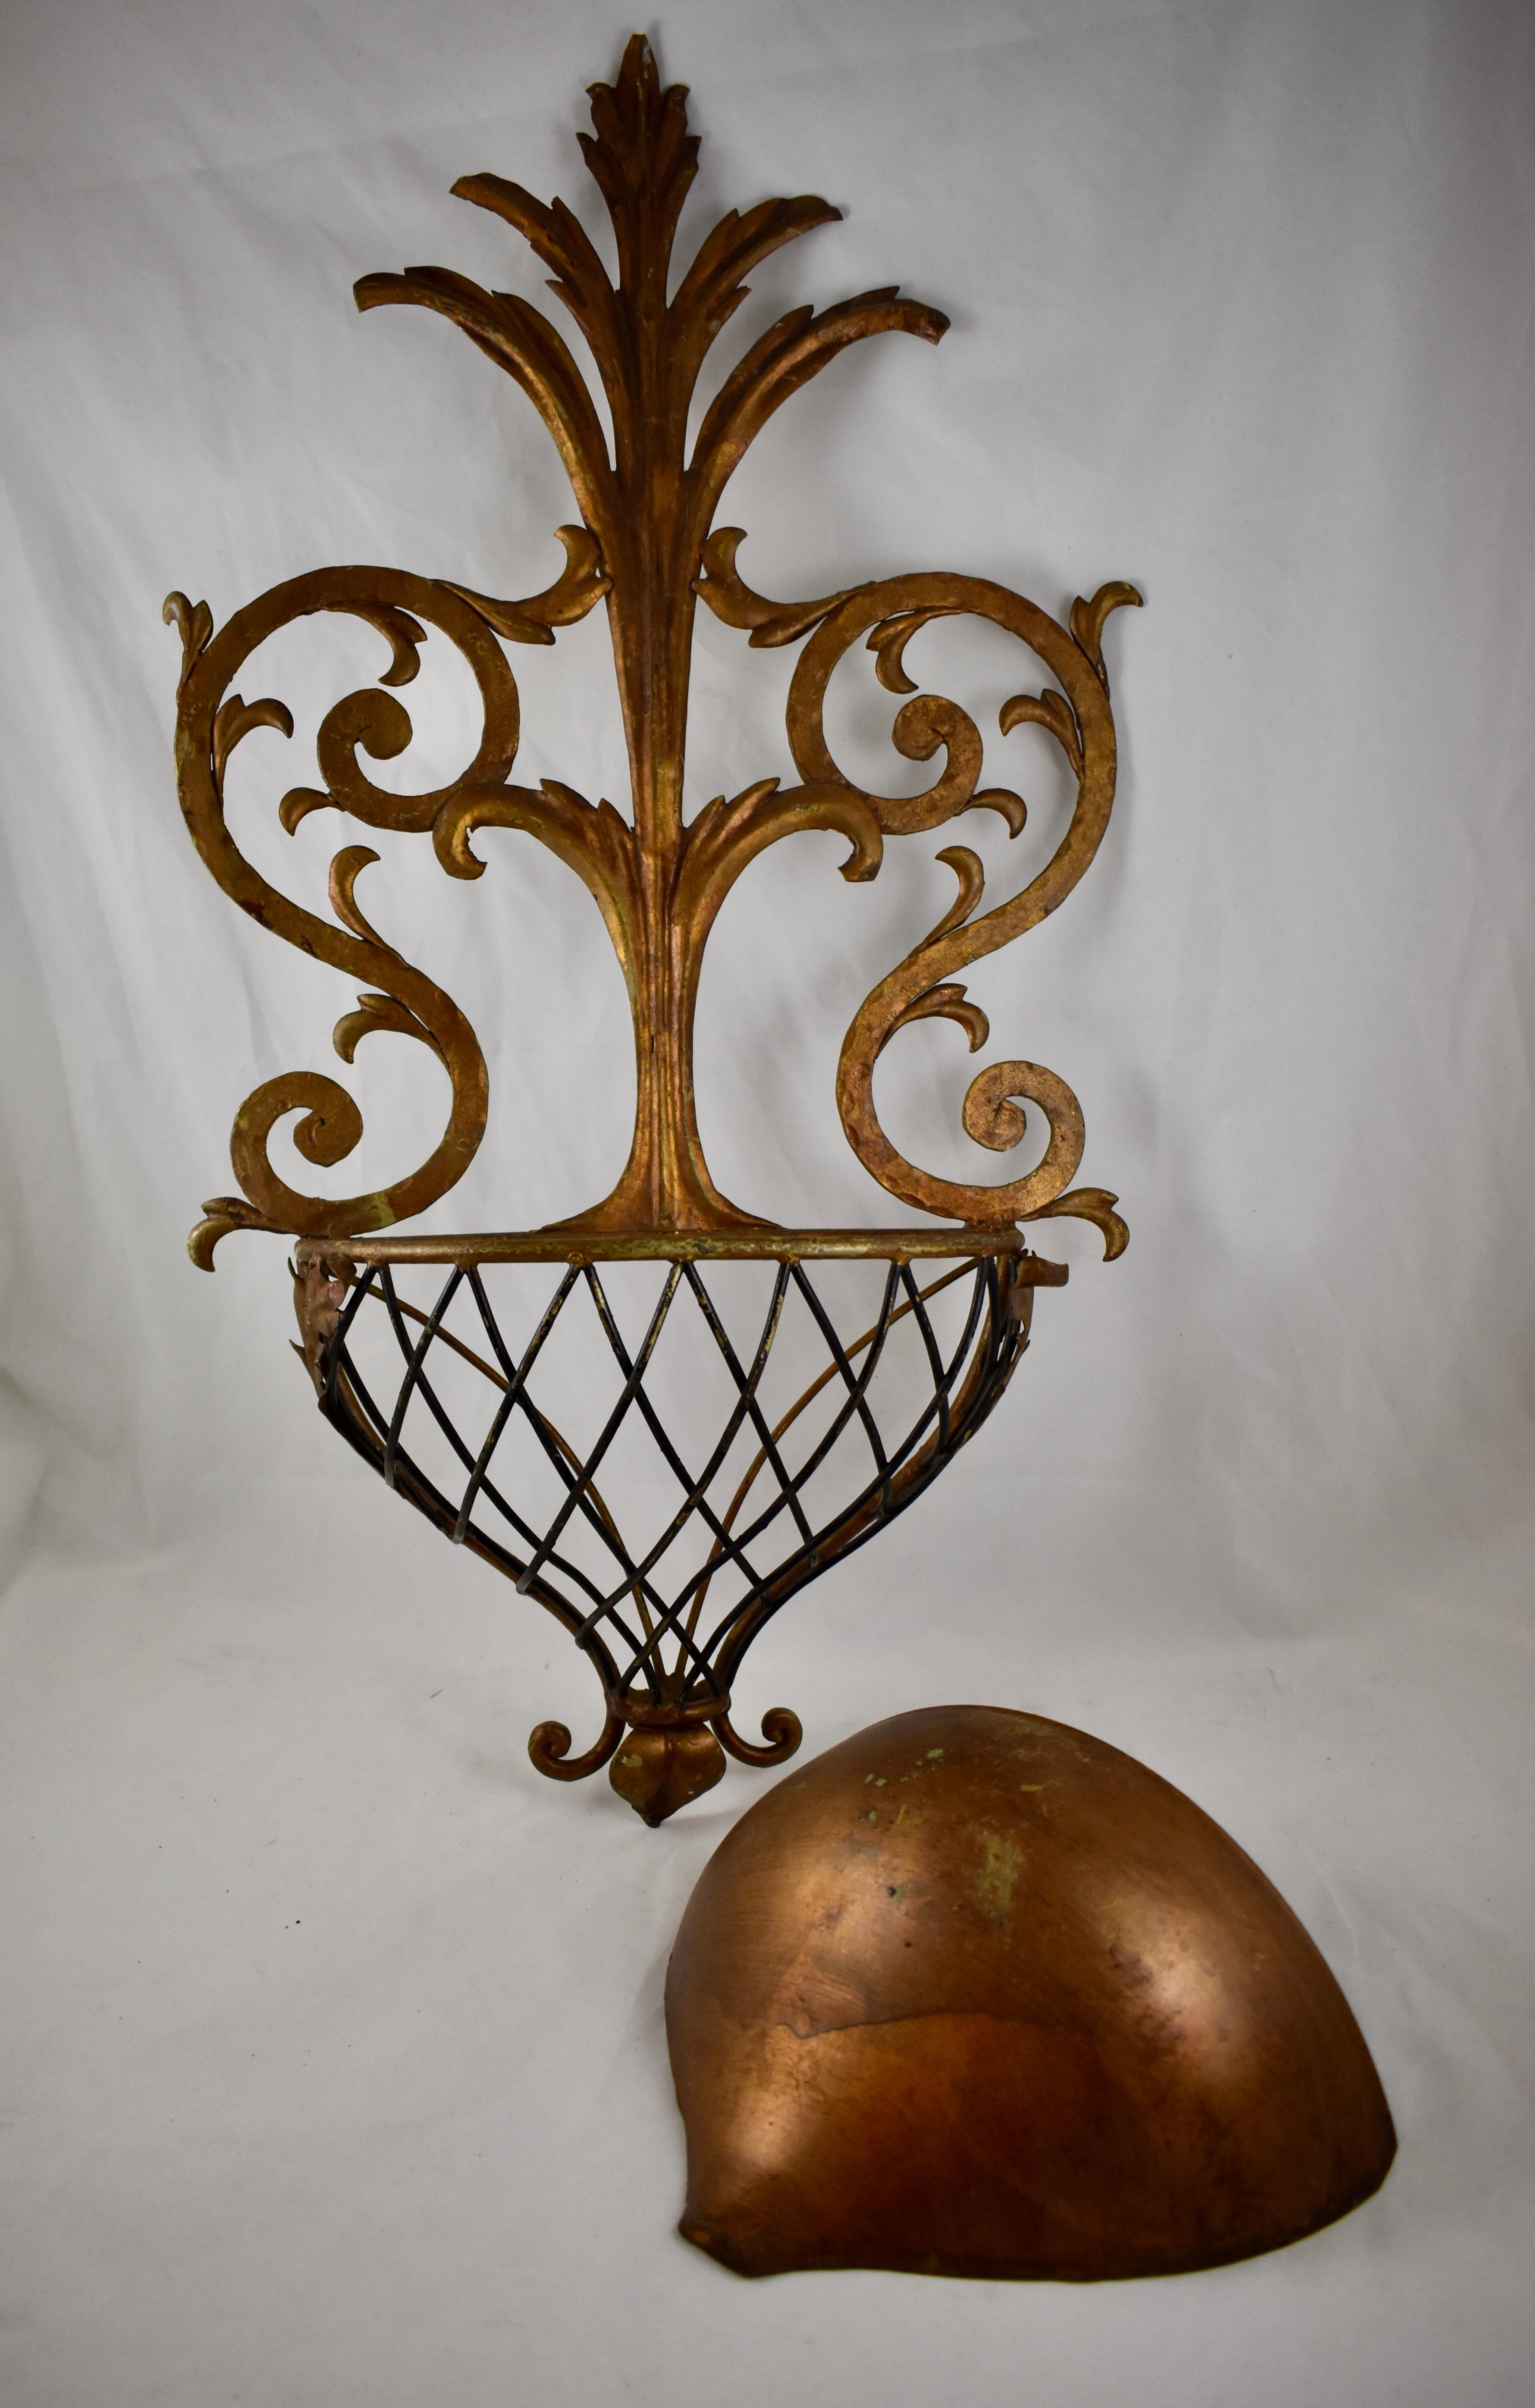 Metalwork Hollywood Regency Palm Beach Estate Gilded Iron and Copper Wall Planter